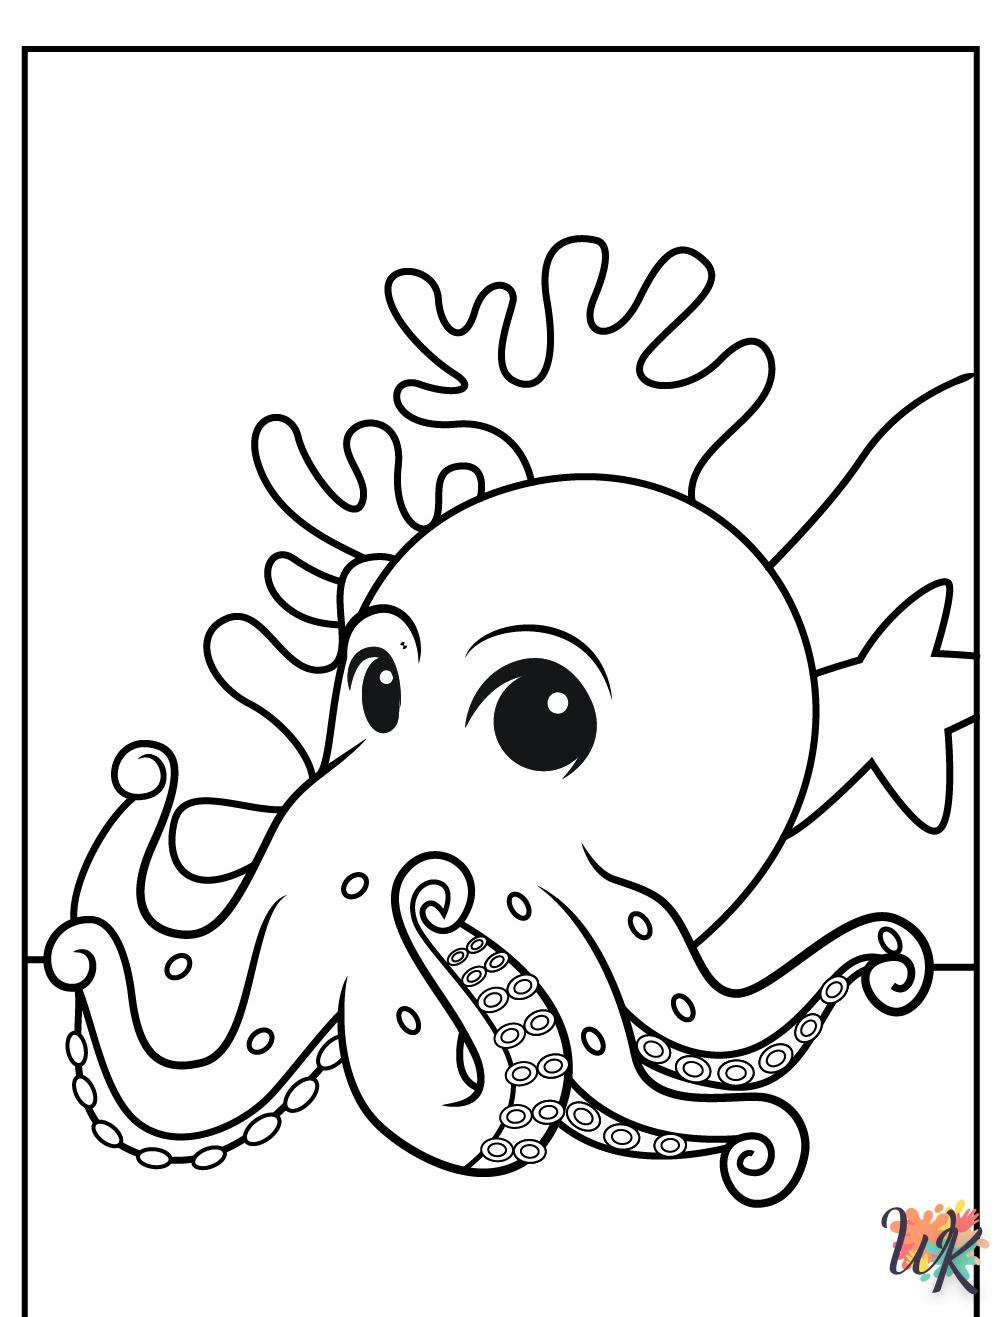 Octopus coloring page for children to print